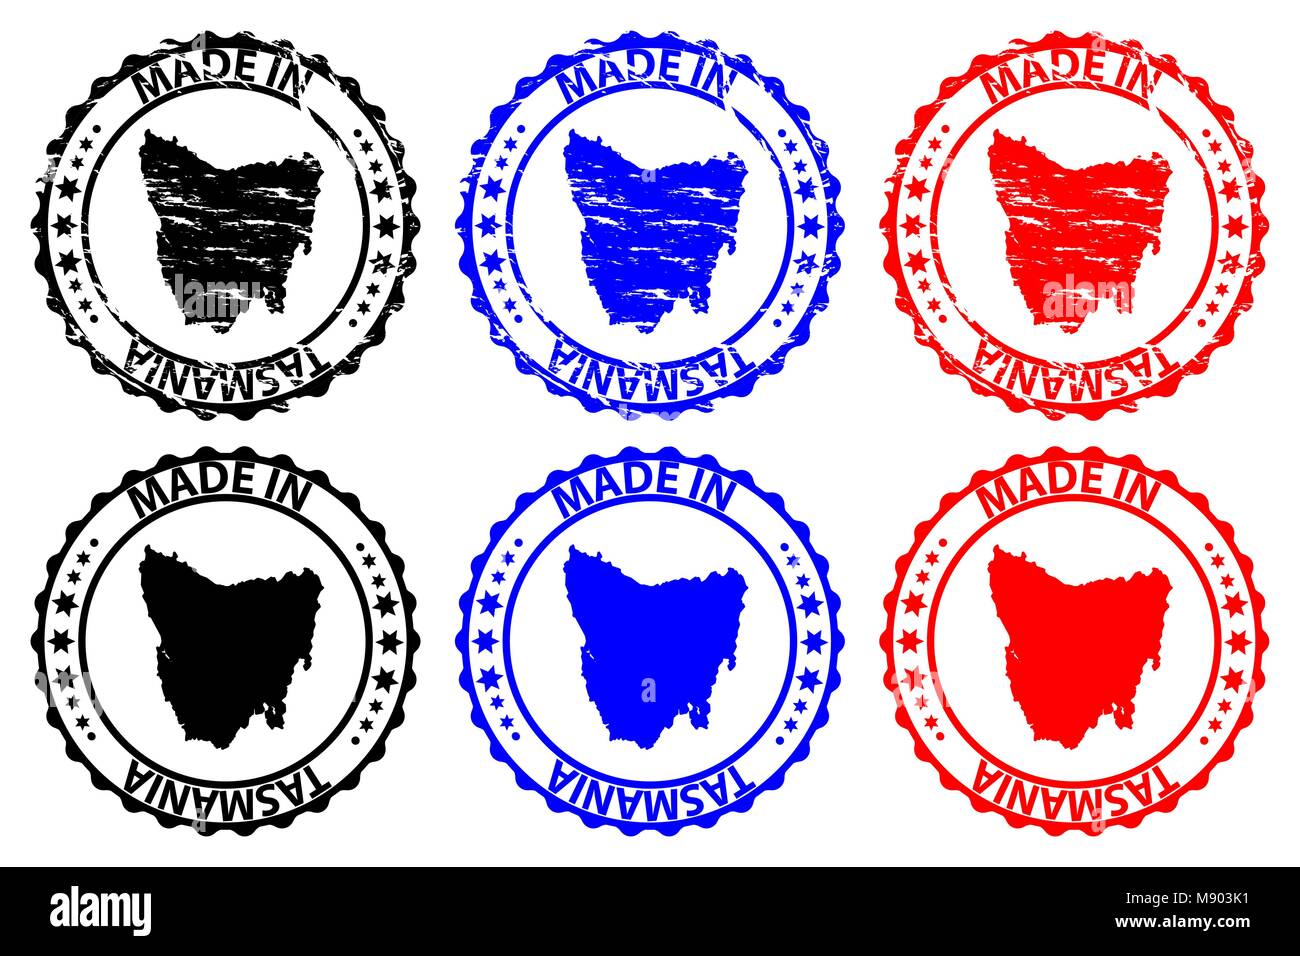 Made in Tasmania - rubber stamp - vector, Tasmania map pattern - black, blue and red Stock Vector